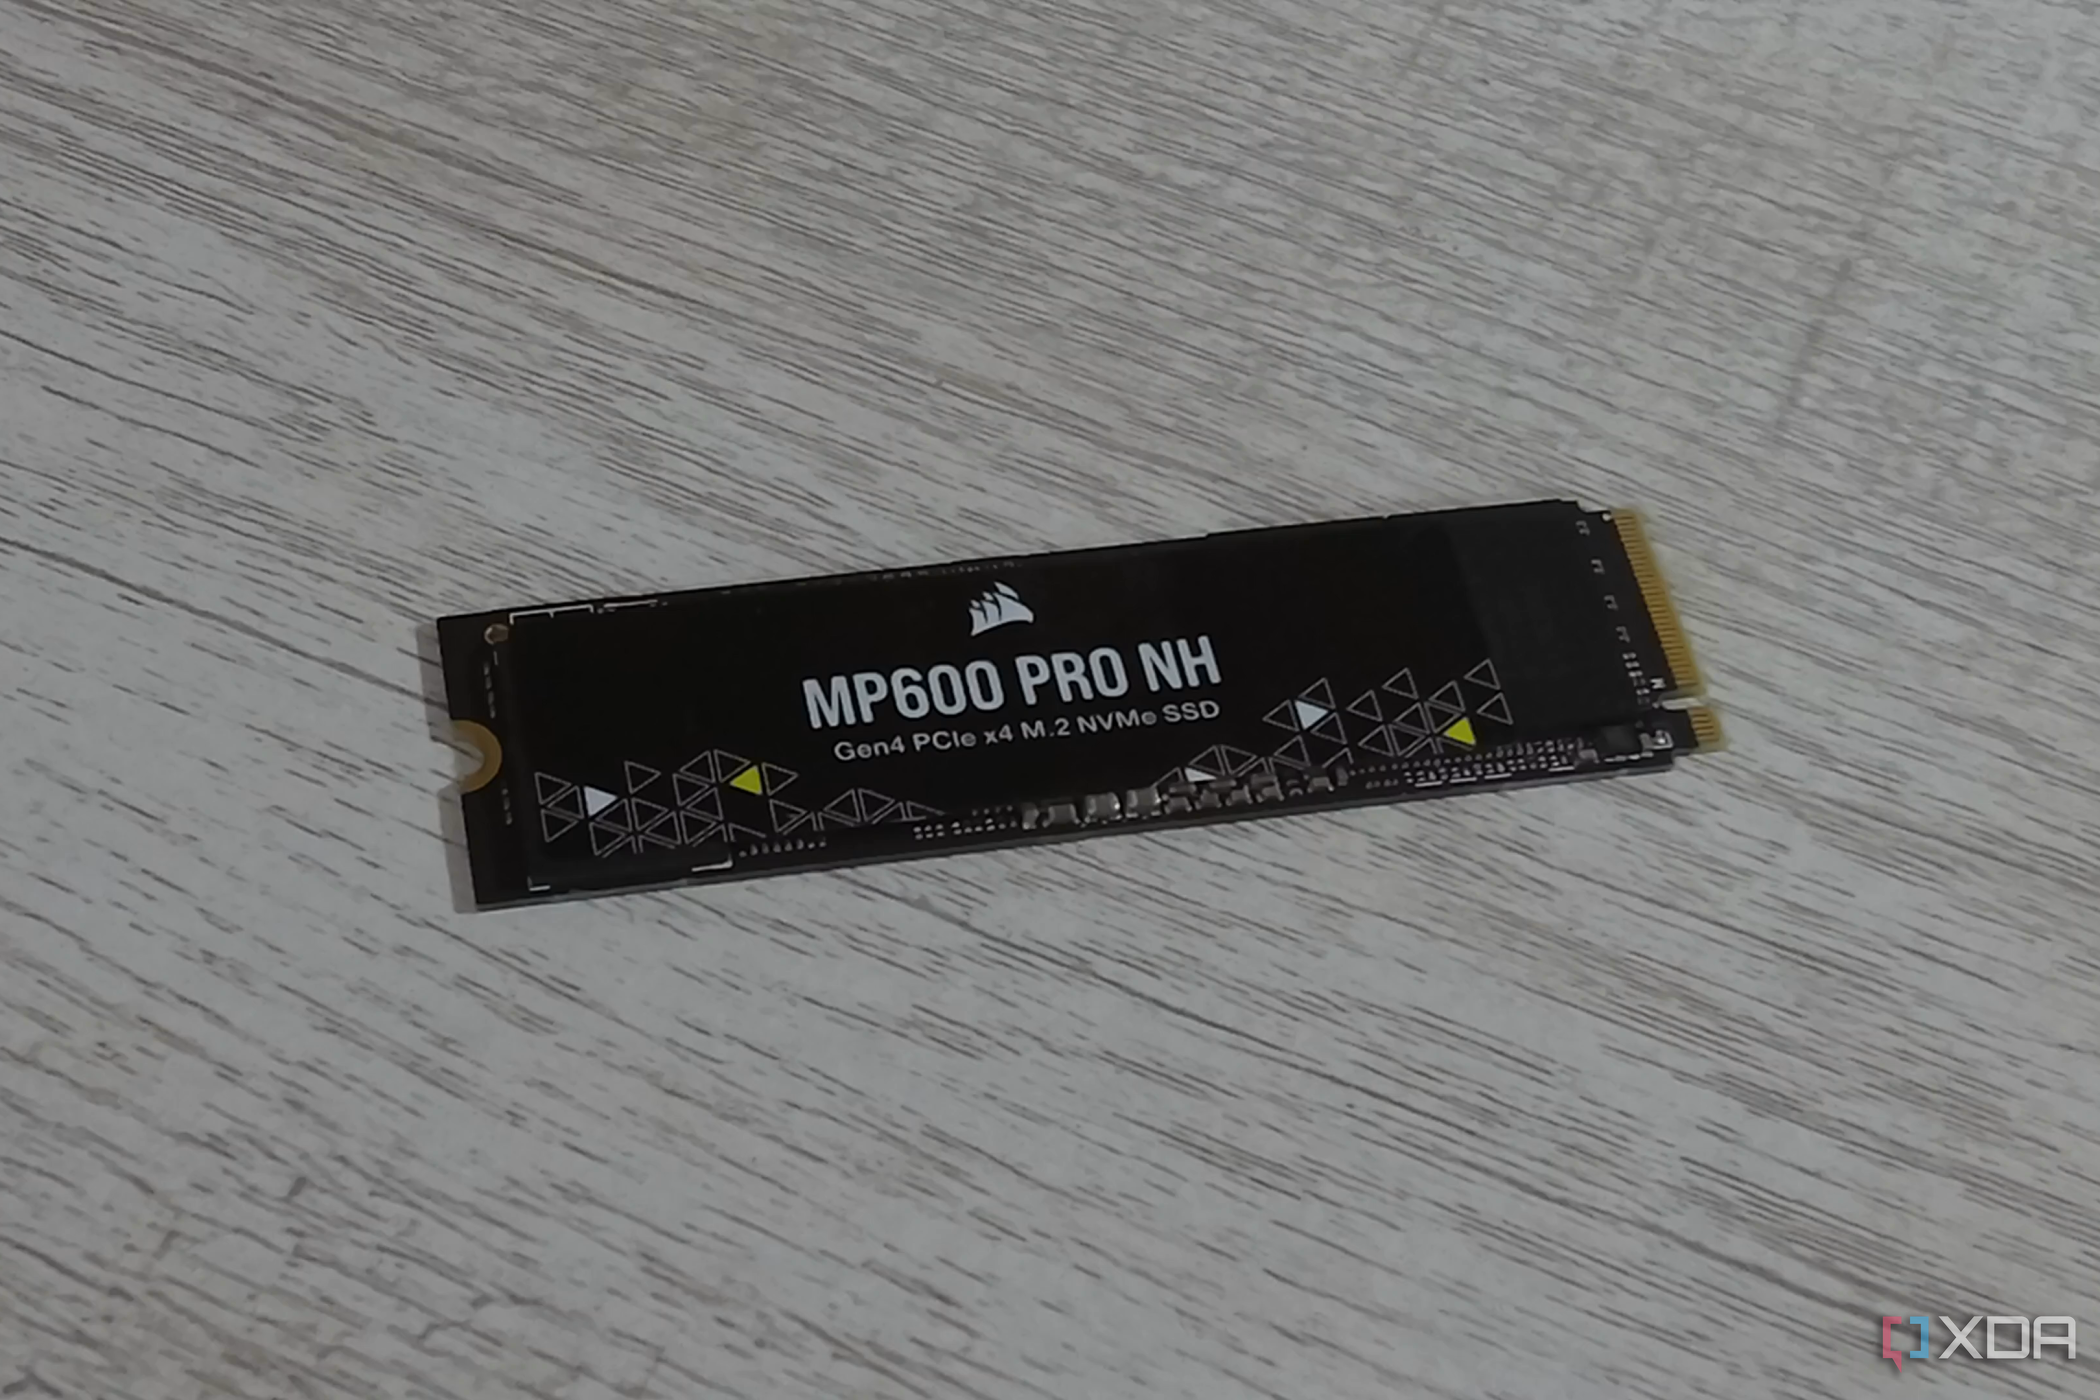 corsair-mp600-pro-nh-review:-dethroning-the-990-pro-as-the-fastest-pcie-4.0-ssd